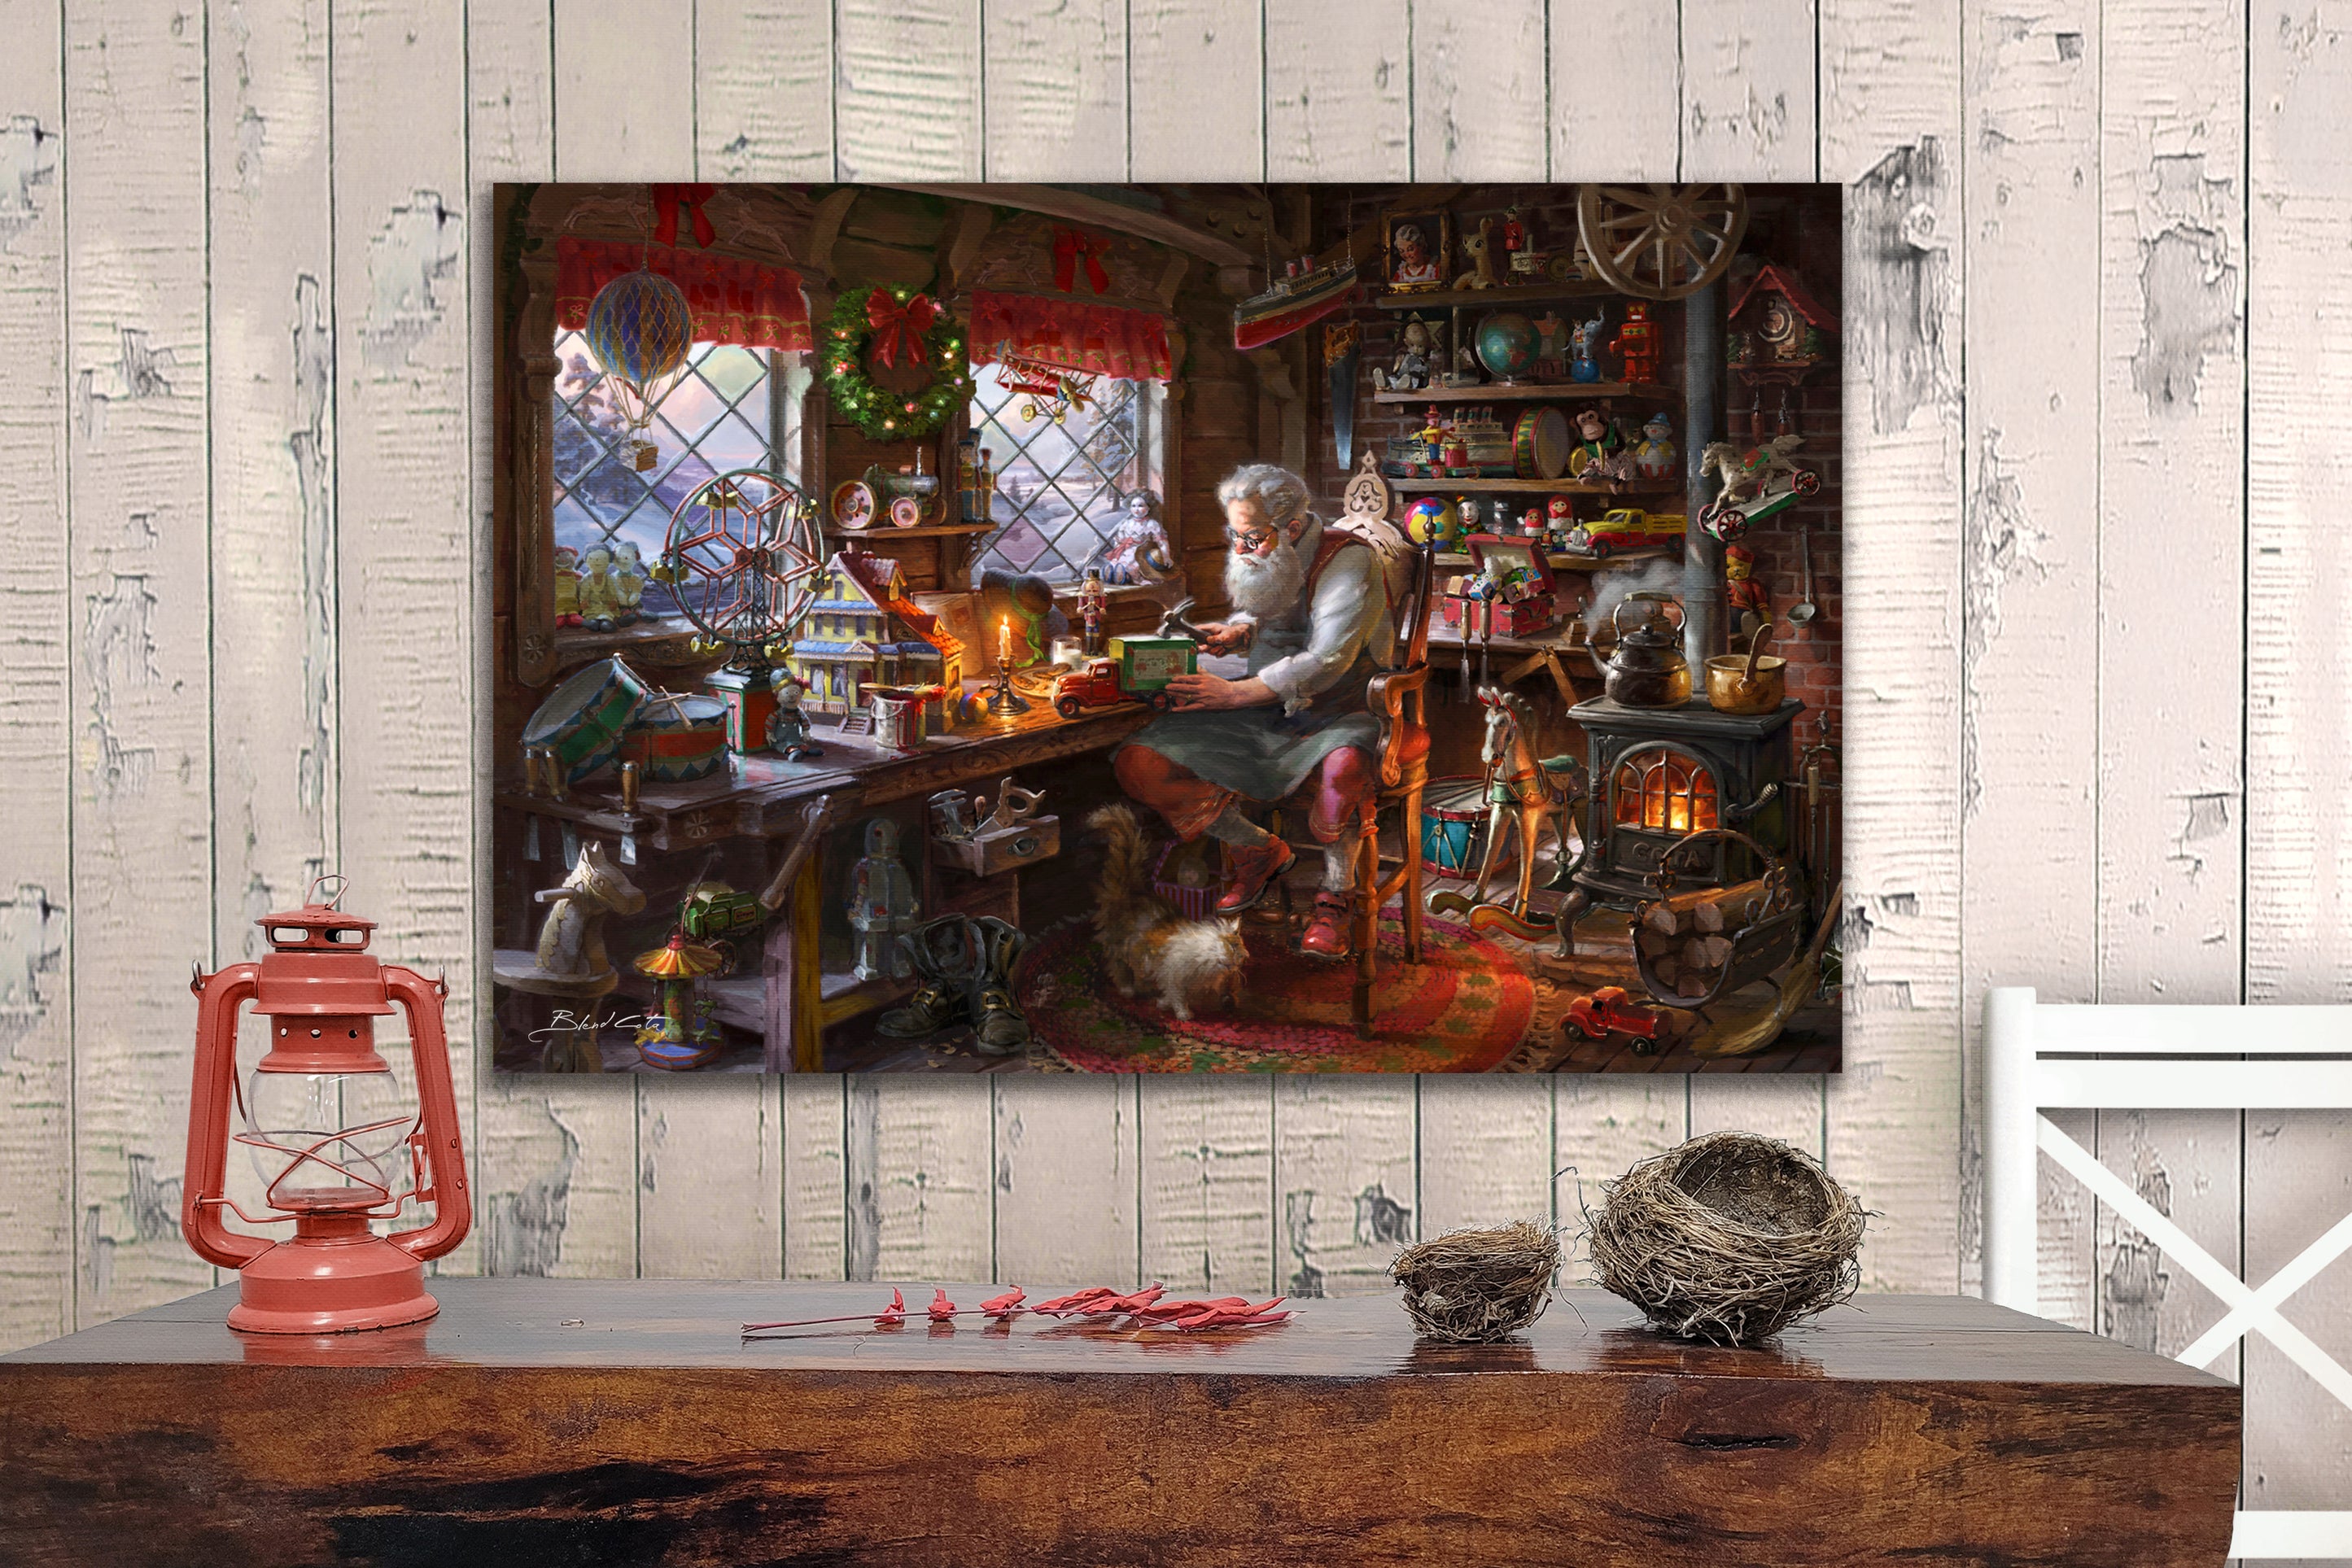 An original oil painting of Santa claus making toys in his workshop  during christmas with a cat by his boots and wood burning stove amongst the many children's toys in a room setting with white barn wood and fireplace. 